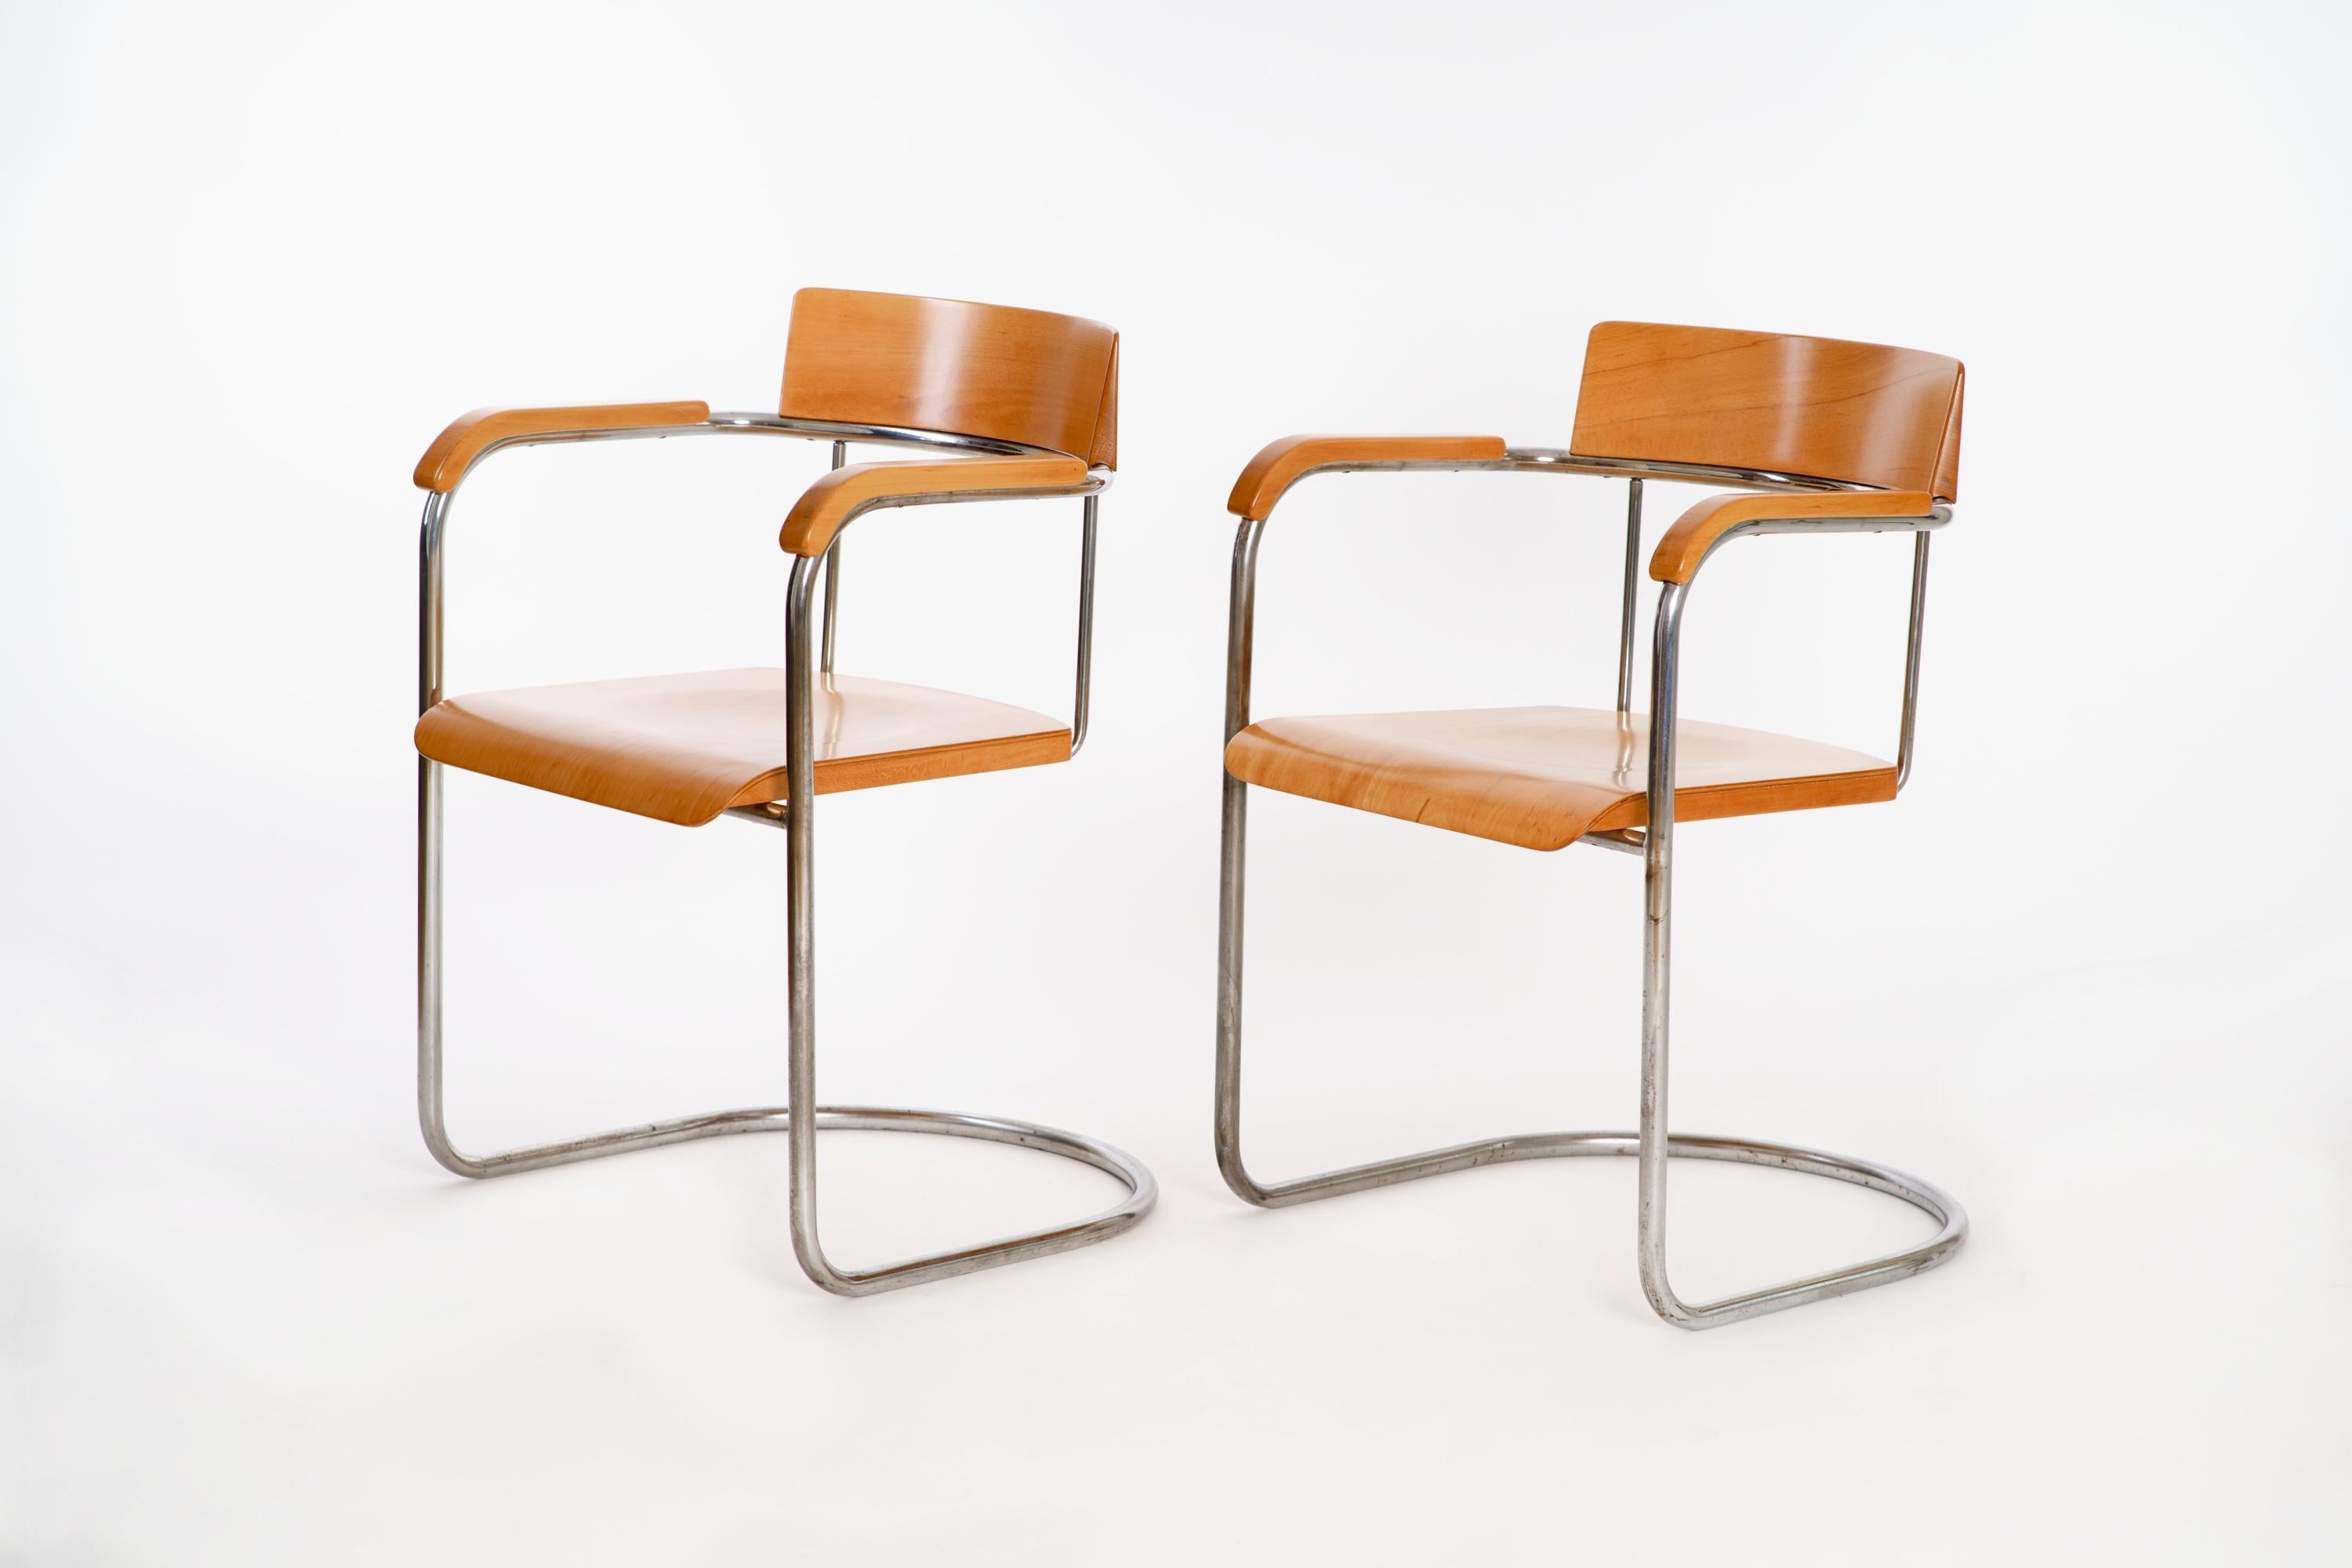 These 2 tubular steel chairs were made in 1930 by Vichr in the former Czechoslovakia. The chrome-plated steel tube has been polished and is in a good original condition with patina, the wooden parts have been restored.